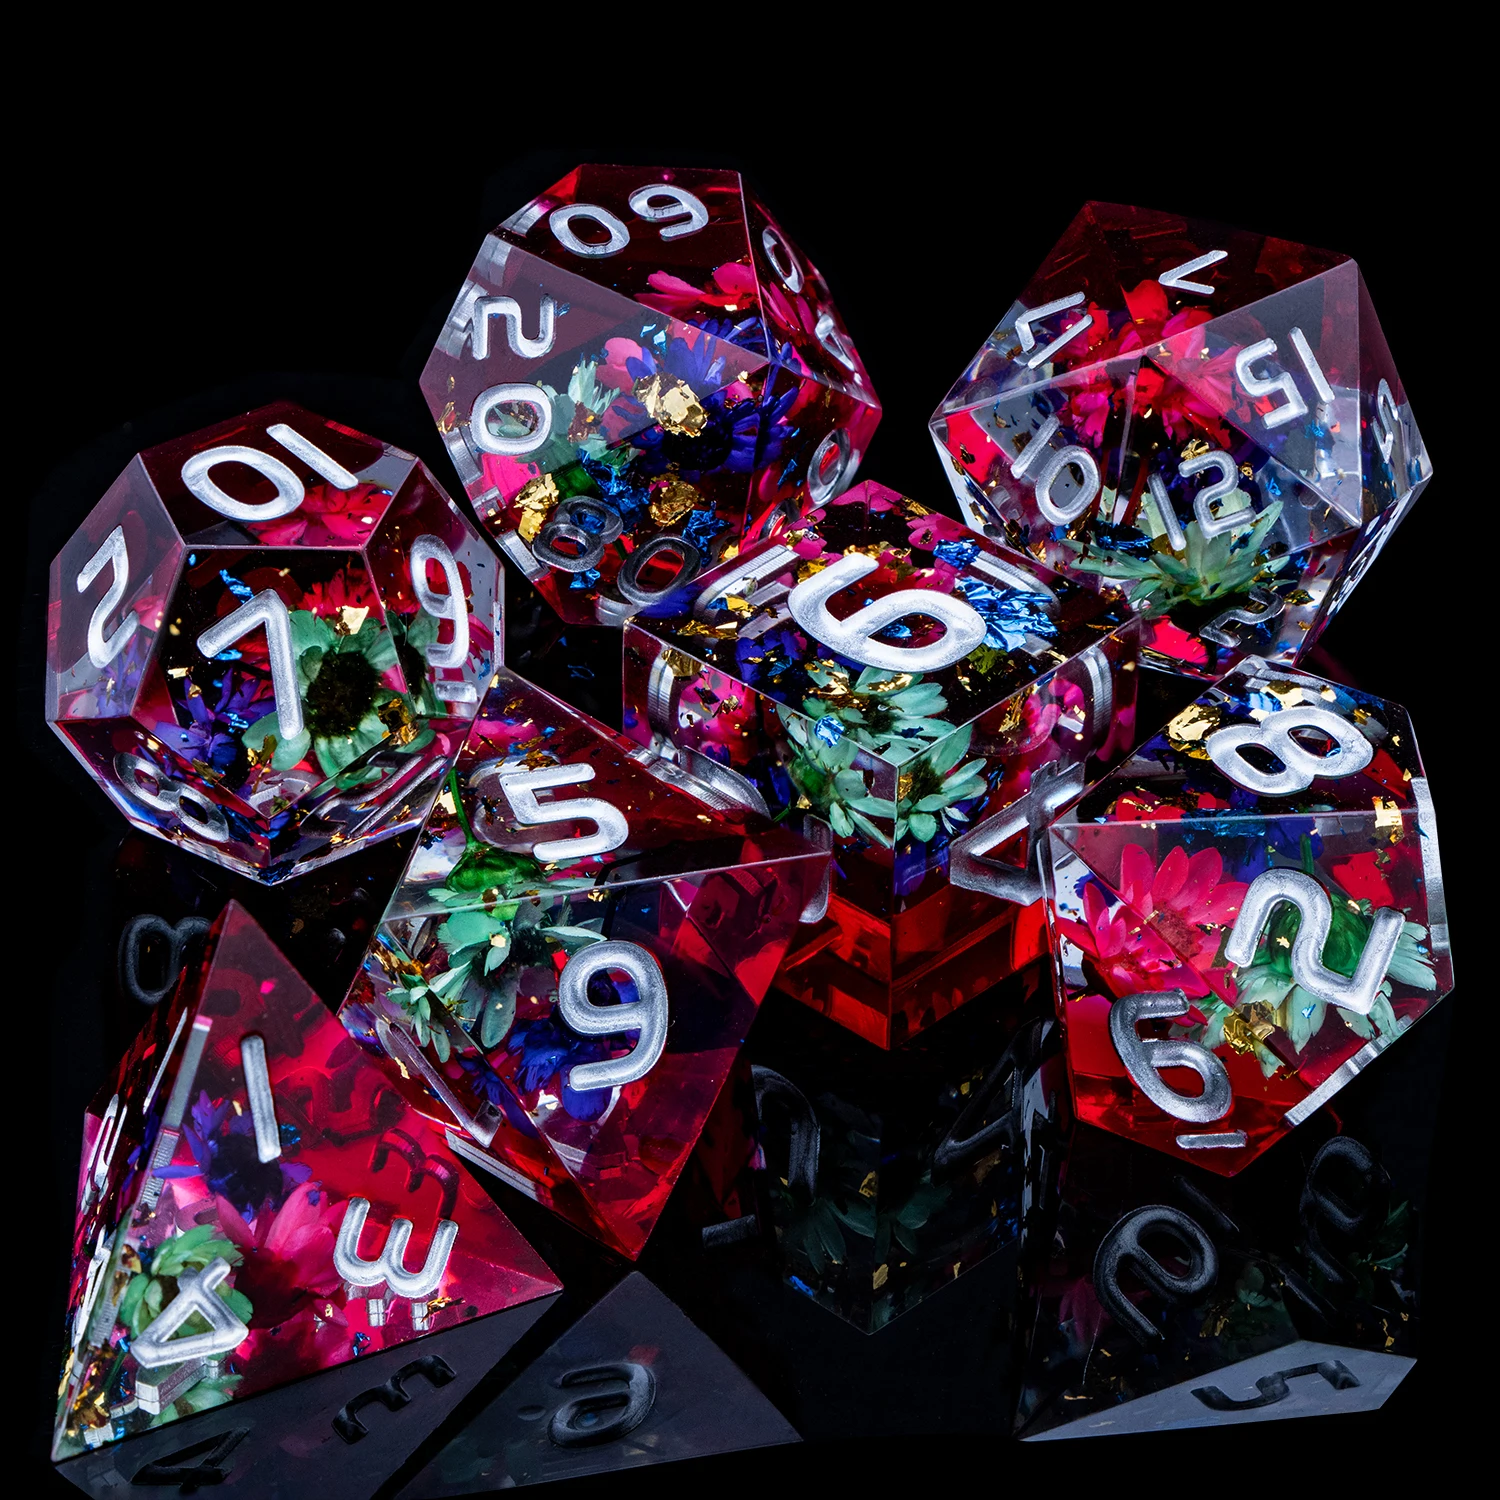 

Dnd Sharp Edge Handmade D20 RPG Polyhedral D and D Flower Resin Dice Set For Dungeons and Dragons Pathfinder Role Playing Games